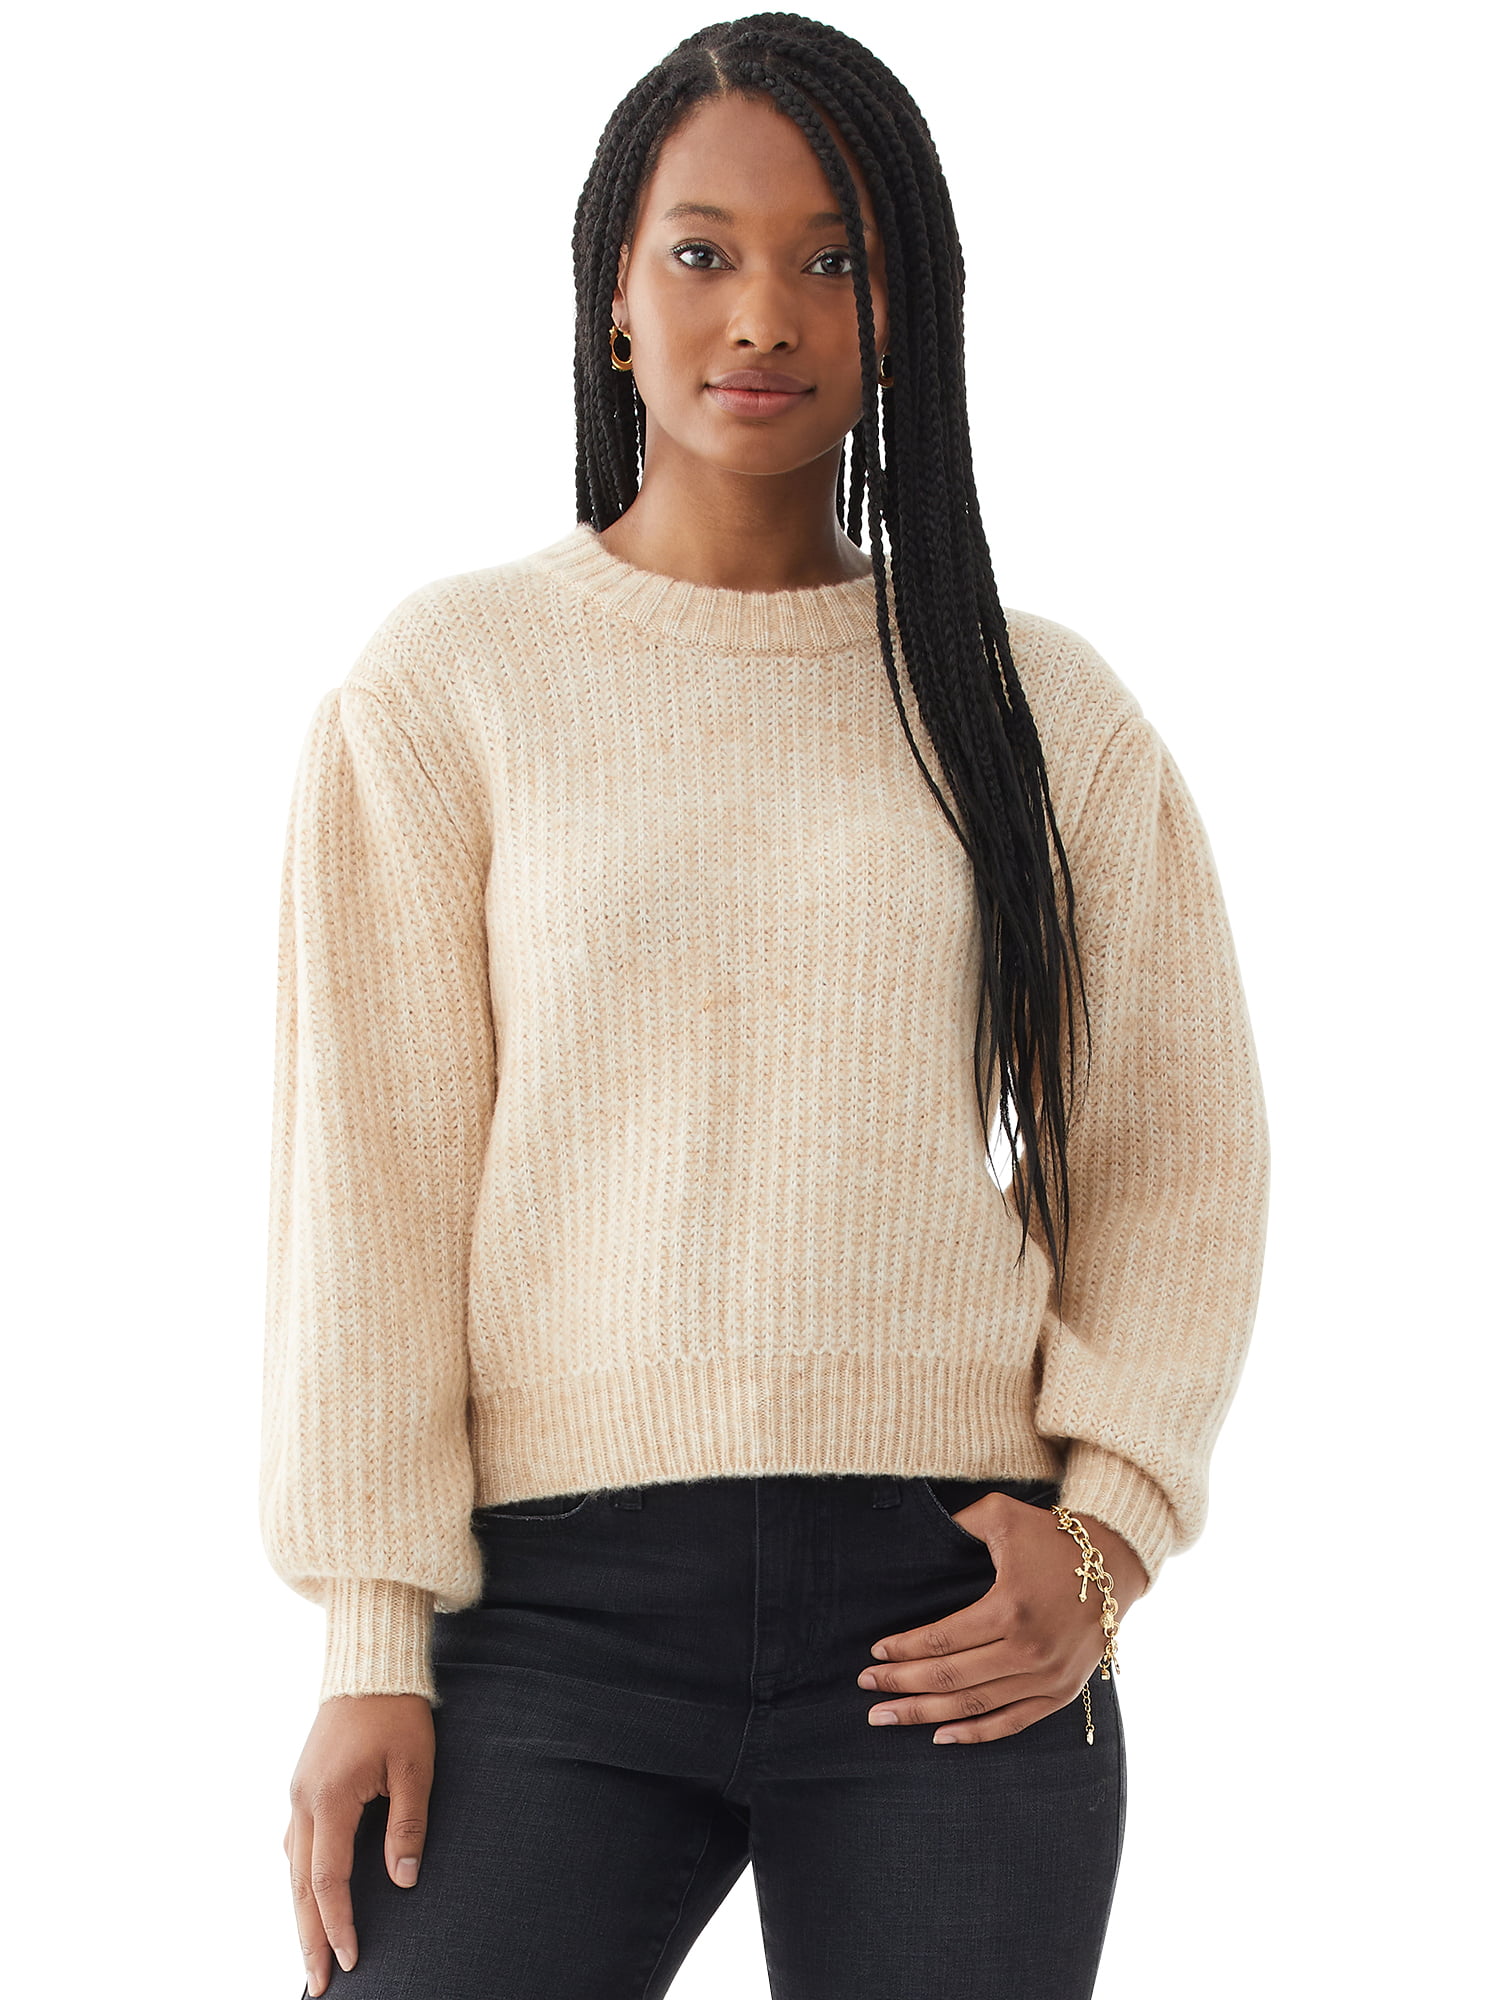 Buy > balloon sleeve cropped sweater > in stock